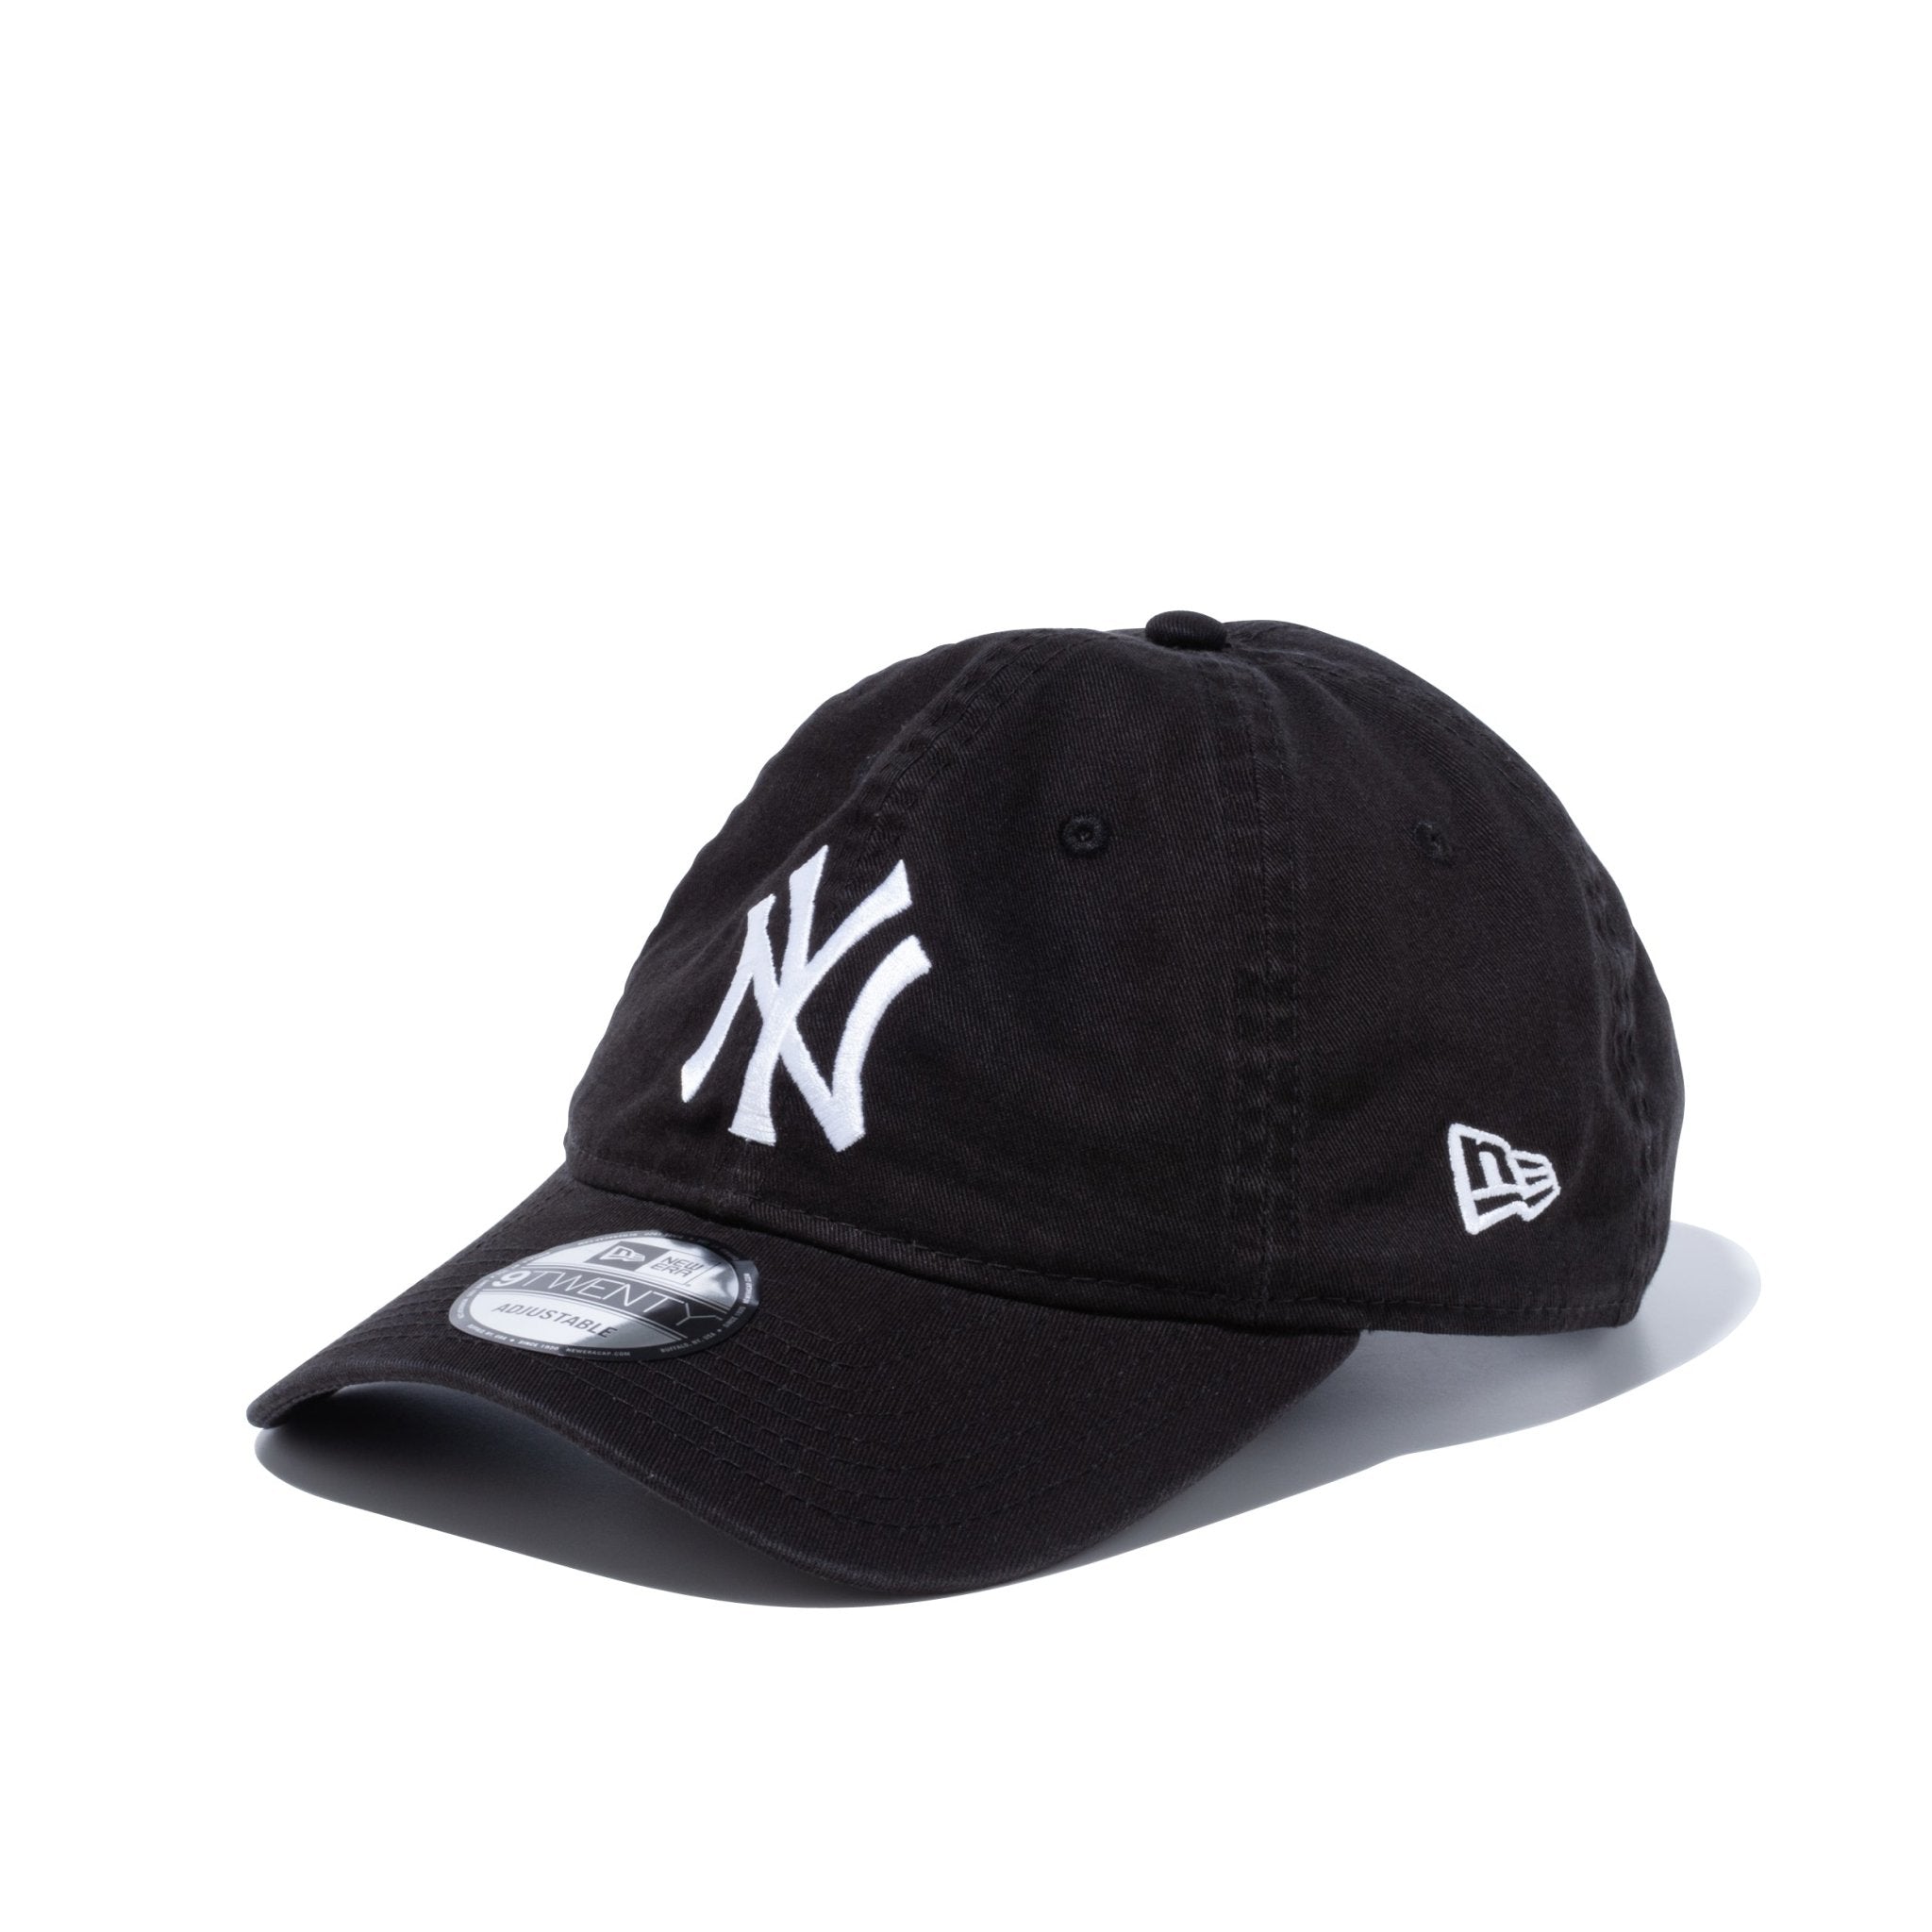 ②NEW ERA(R)/Low Profile 59FIFTY(R) ヤンキース